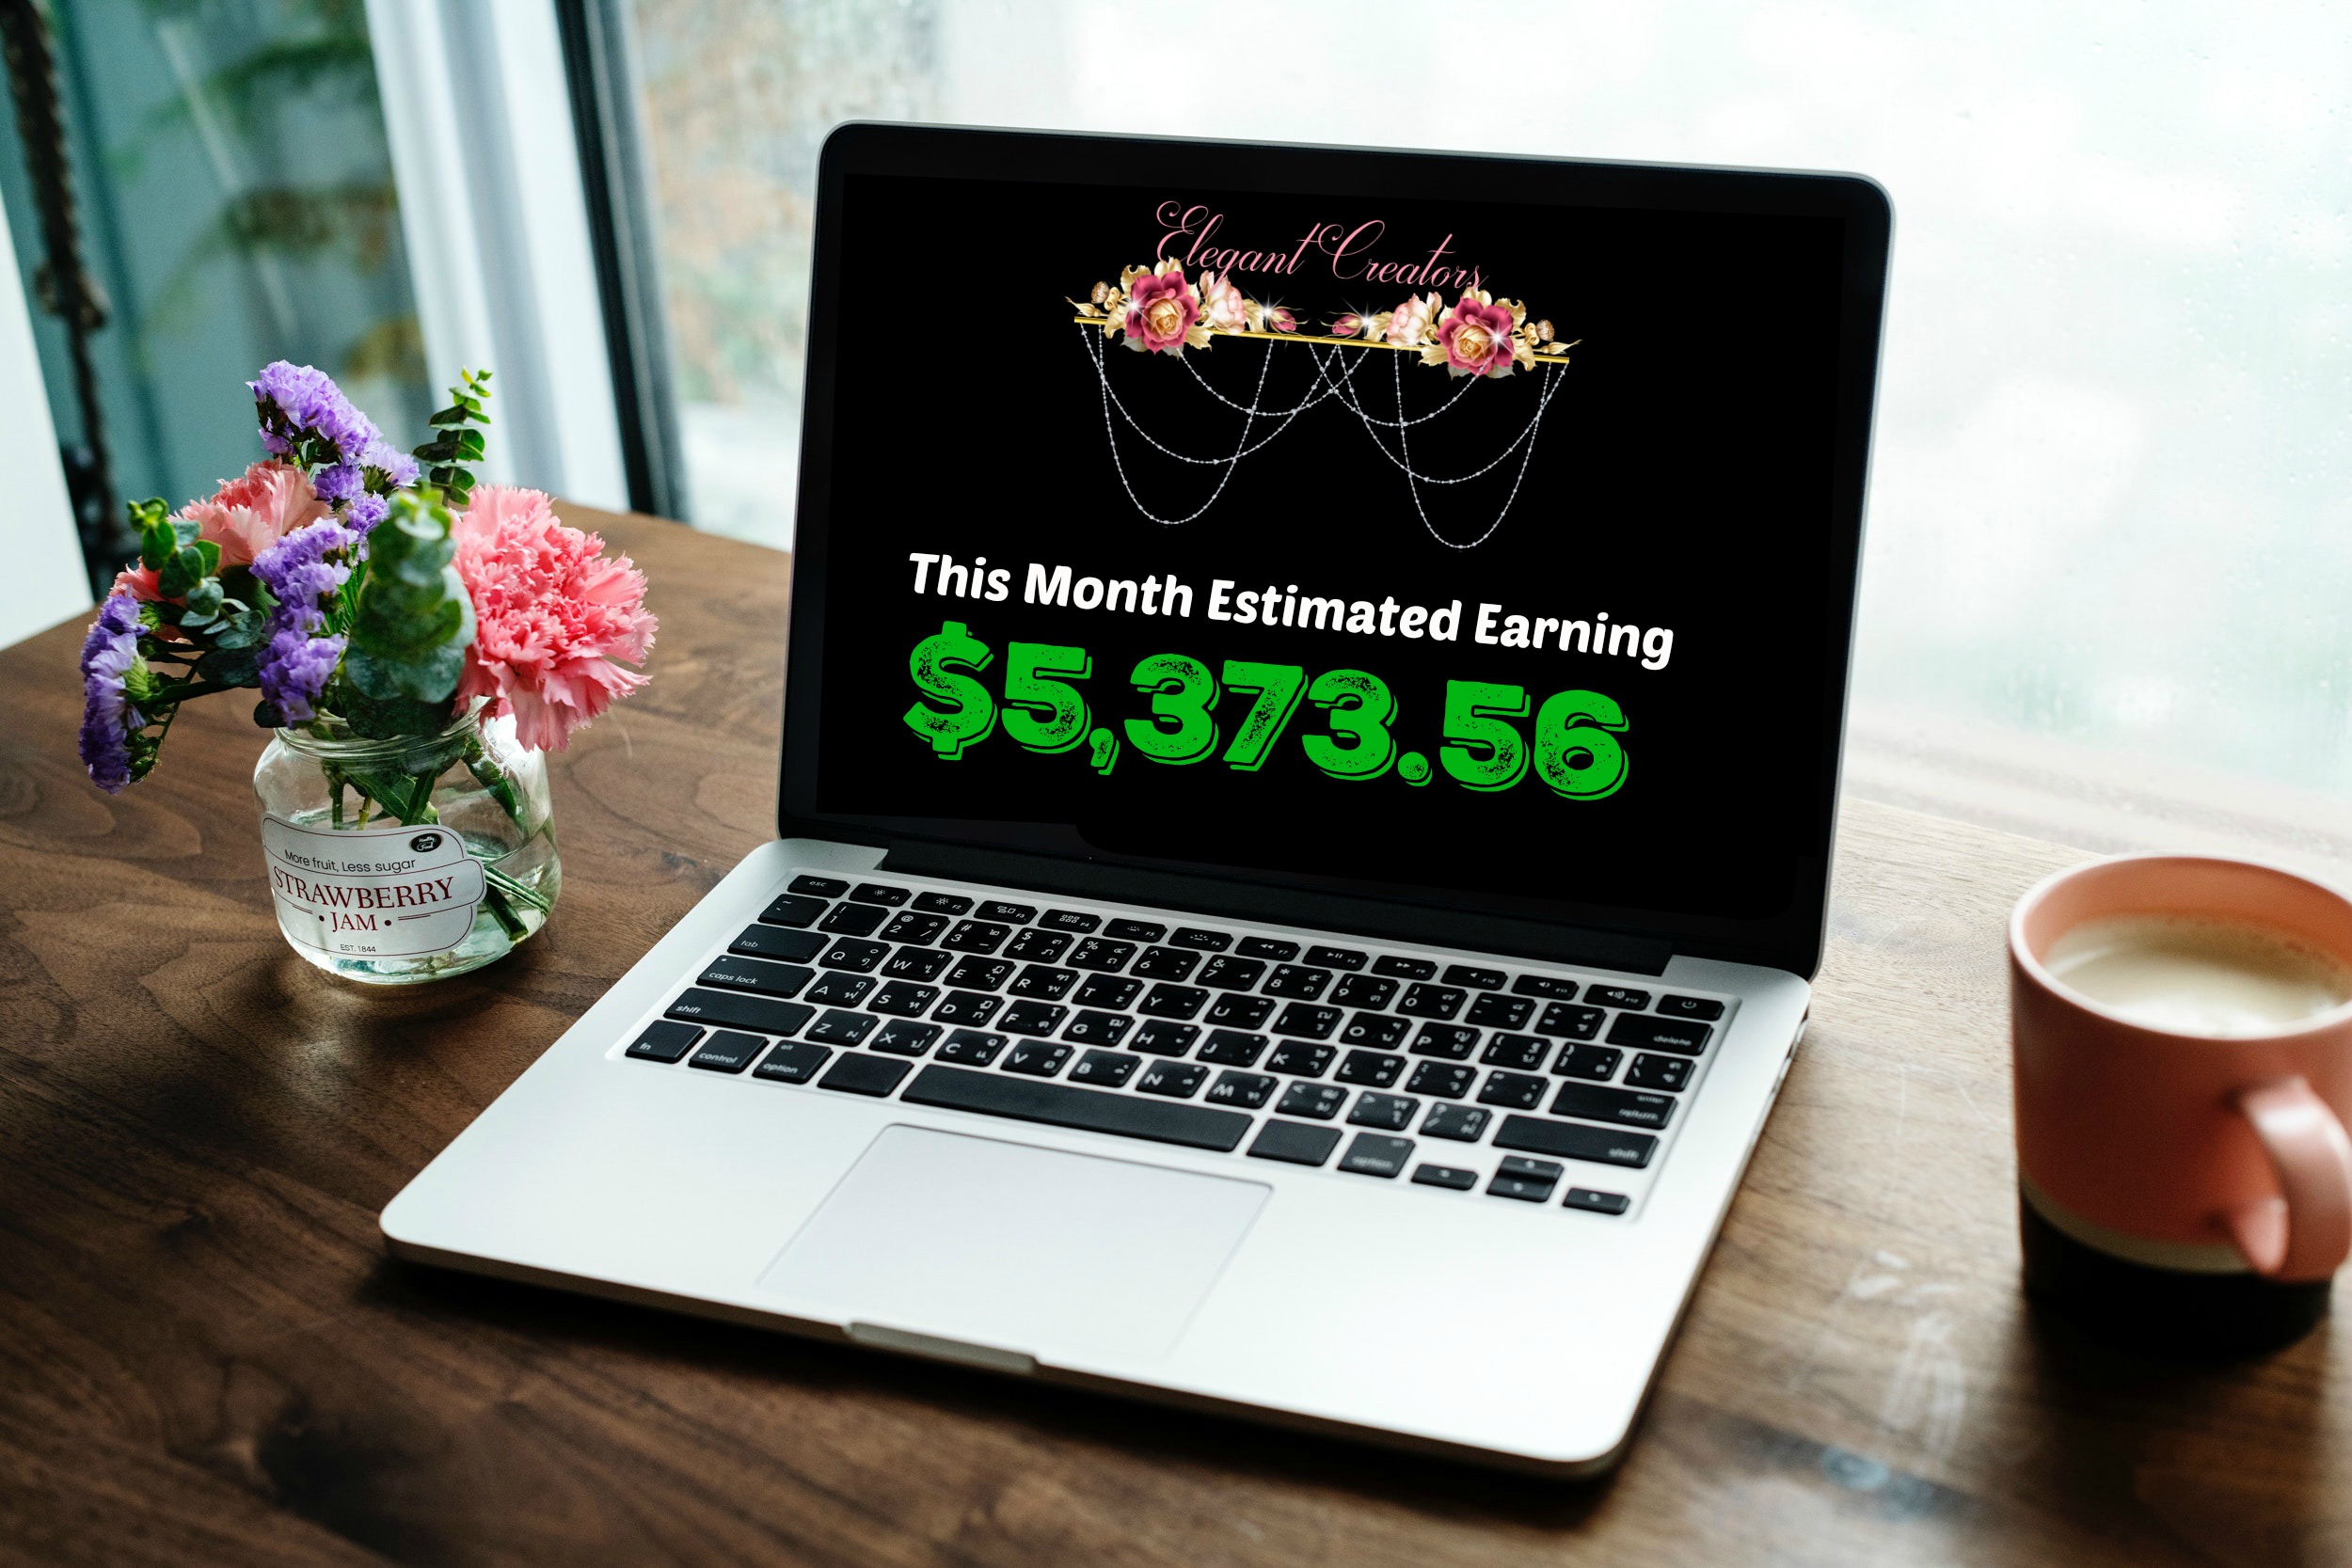 This month estimated earning